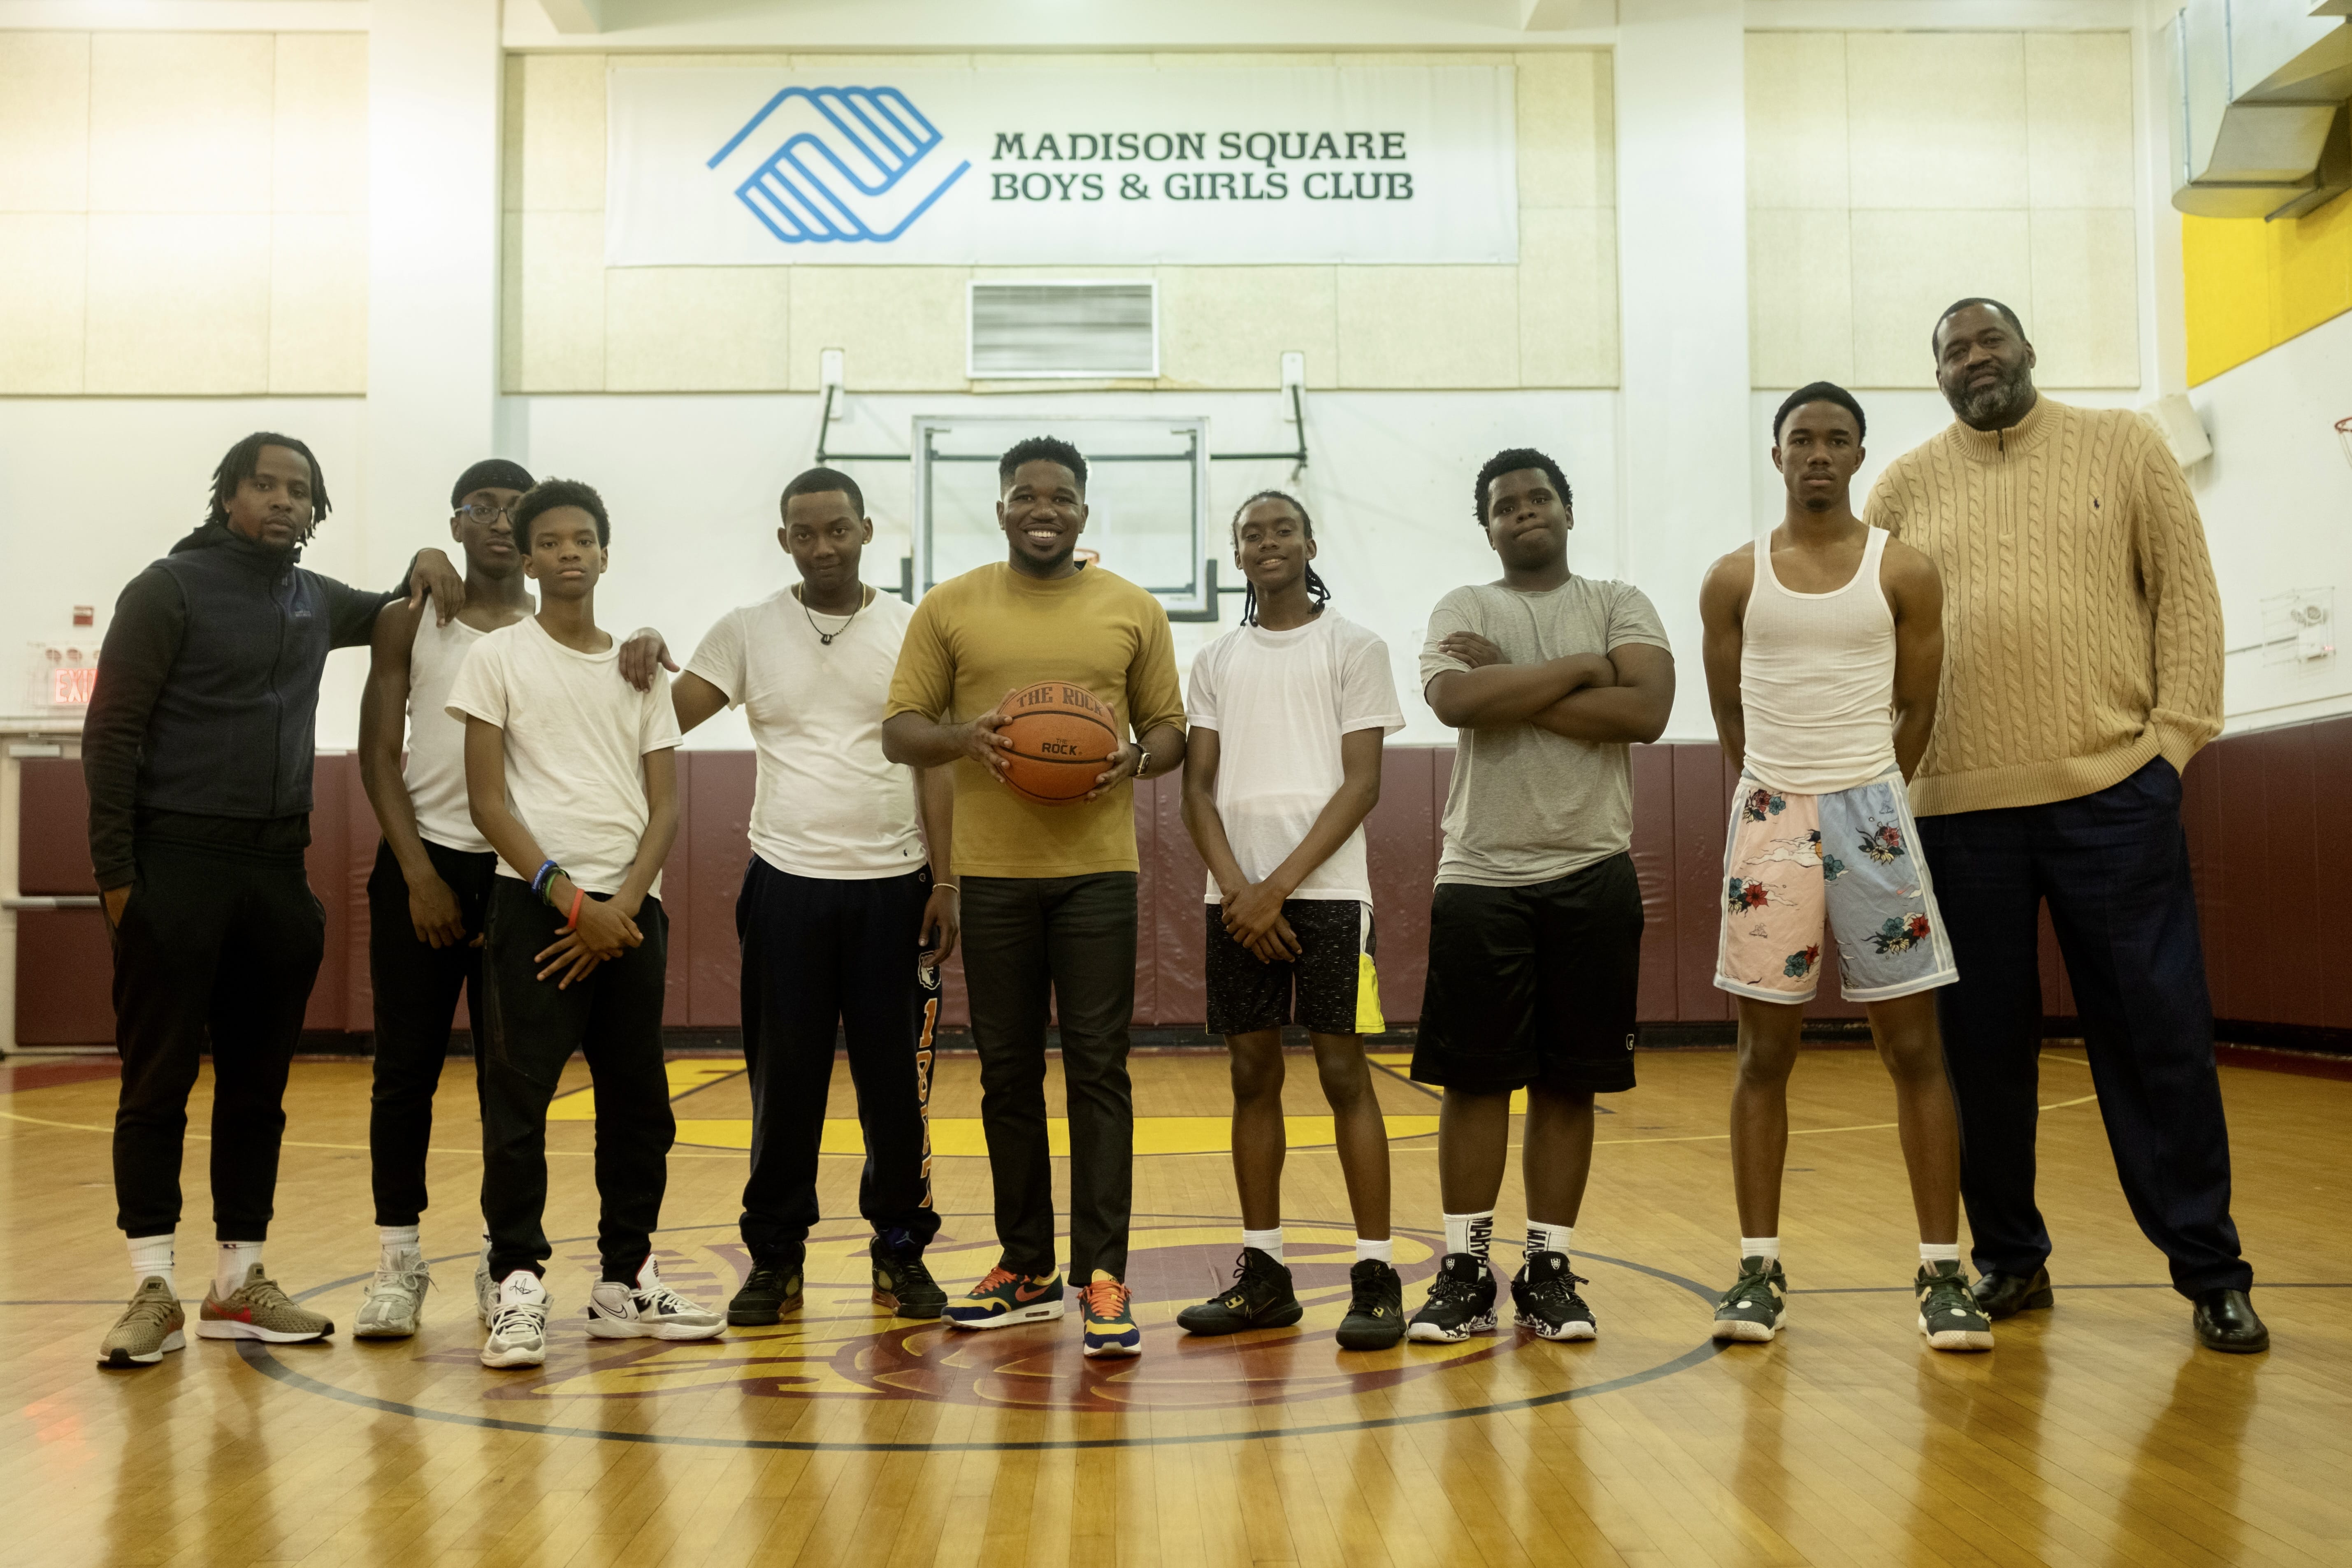 Jade Daniels with a group of kids in the basketball court of the Madison Square Boys and Girls club